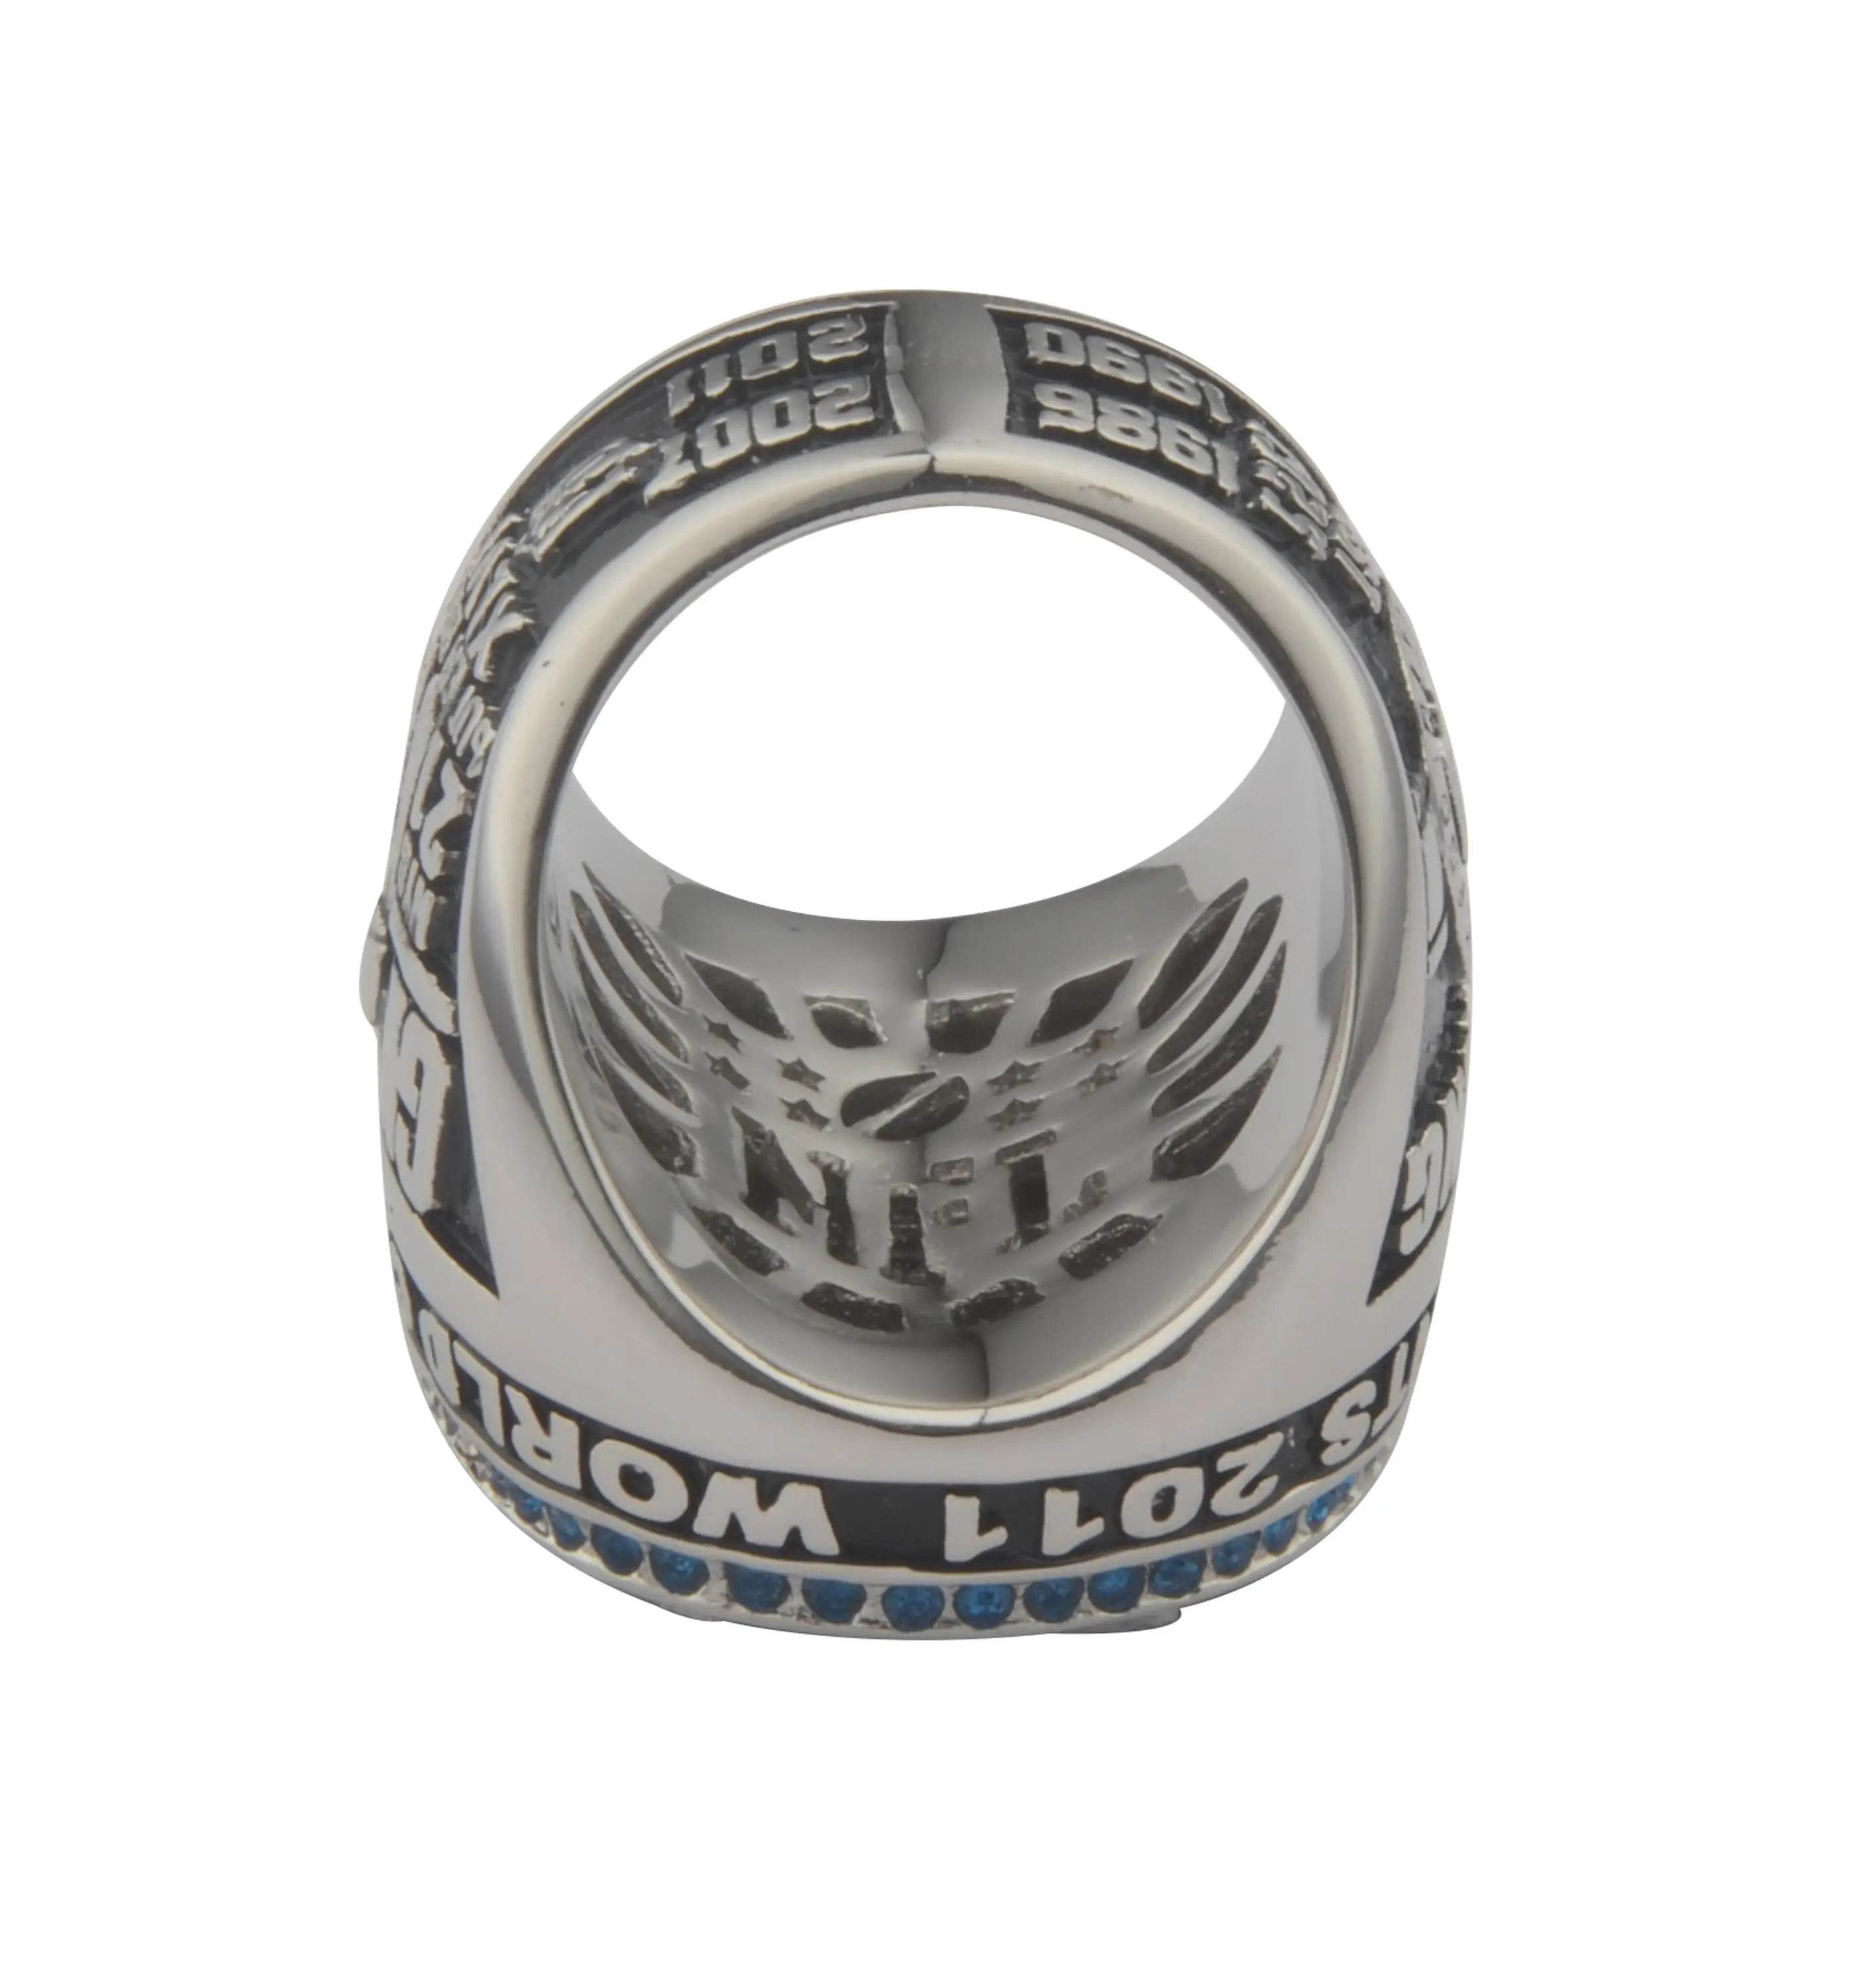 Customized fancy championship rings sports championship rings china manufacturer